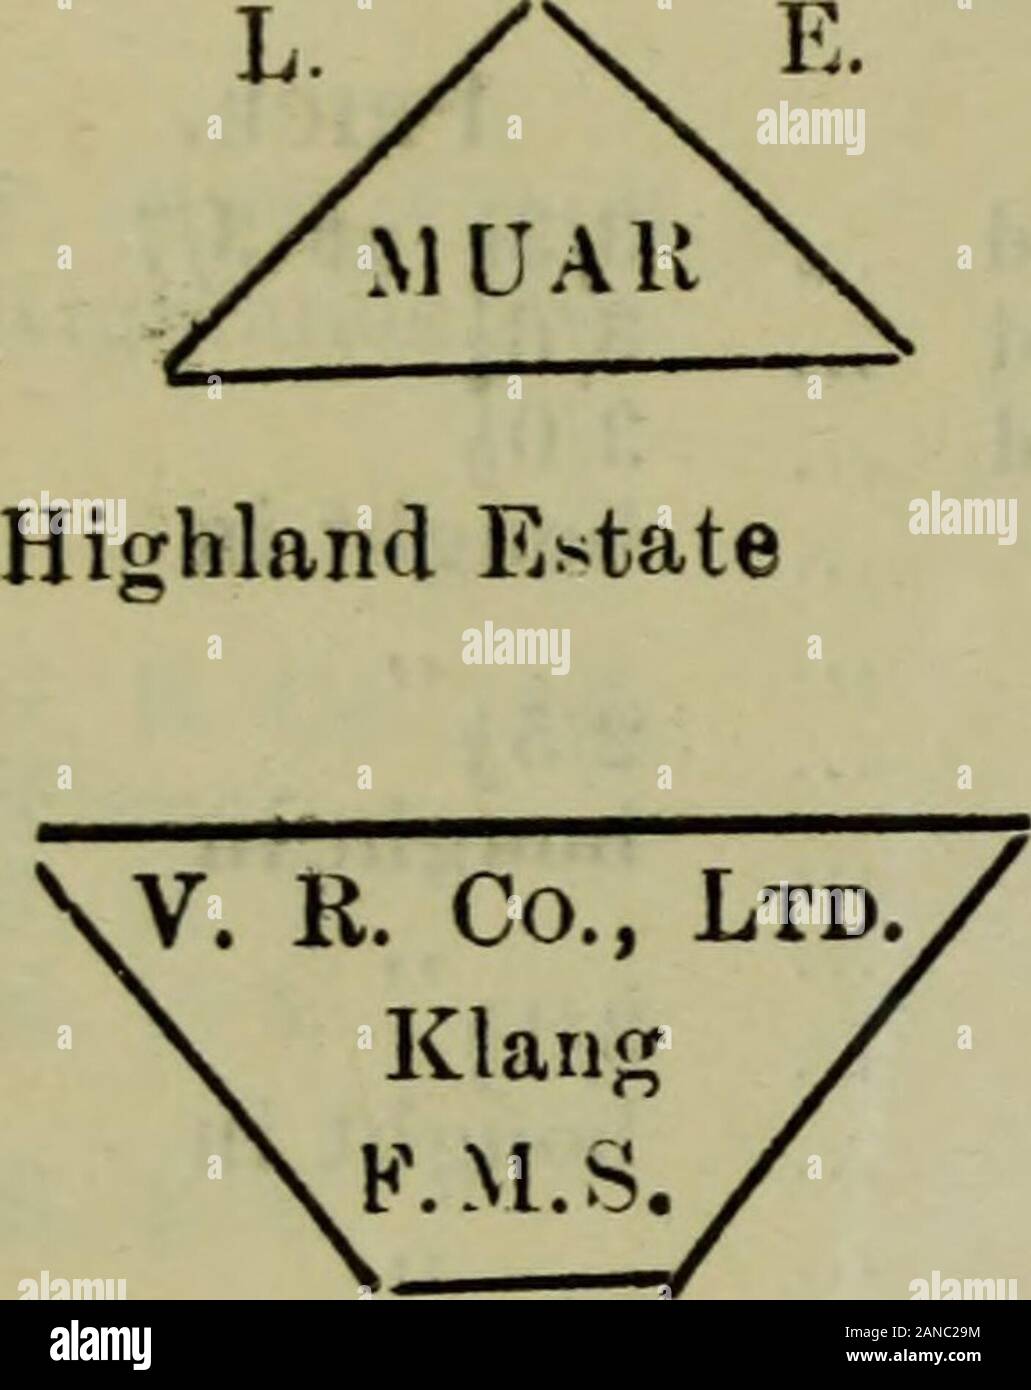 Agricultural bulletin of the Straits and Federated Malay StatesNew series . J Sheets Merton 7 &gt; J Biscuits F. S. R. Co., Ltd. 1 Crepe 4 j j Sheets 1 Crepe N. H. R. Co., Ltd. 1 J J B. R. R. Co., Ltd. 9 J&gt; j) 37 J J D. 2 &gt; &gt; Block 13 Sheets R.M. P.Ltd. B. & D. F. I).P. S. K. R. Co., Ltd. R. R.S. & D. 12 10 5 9 sold4 sold7 sold CrepeSheet- Crepe SheetsScrap Price.3/3^ at 3/73/6* 3/0£ bought in 2/oVbought in 3/lfbought in 3/- 3/03 at 3/i 3/0f at 3/33 3/6| 3/6i 3/2 at 3/3 3/3? at 3/6 3/6*2/51 R. R.L. E. D. Sheets 3/6 R. S.L. K. D. ,, Scrap 1/- at 2/6* S. RR. A. (i. „ Biscuits 2/9^ R. R. Stock Photo